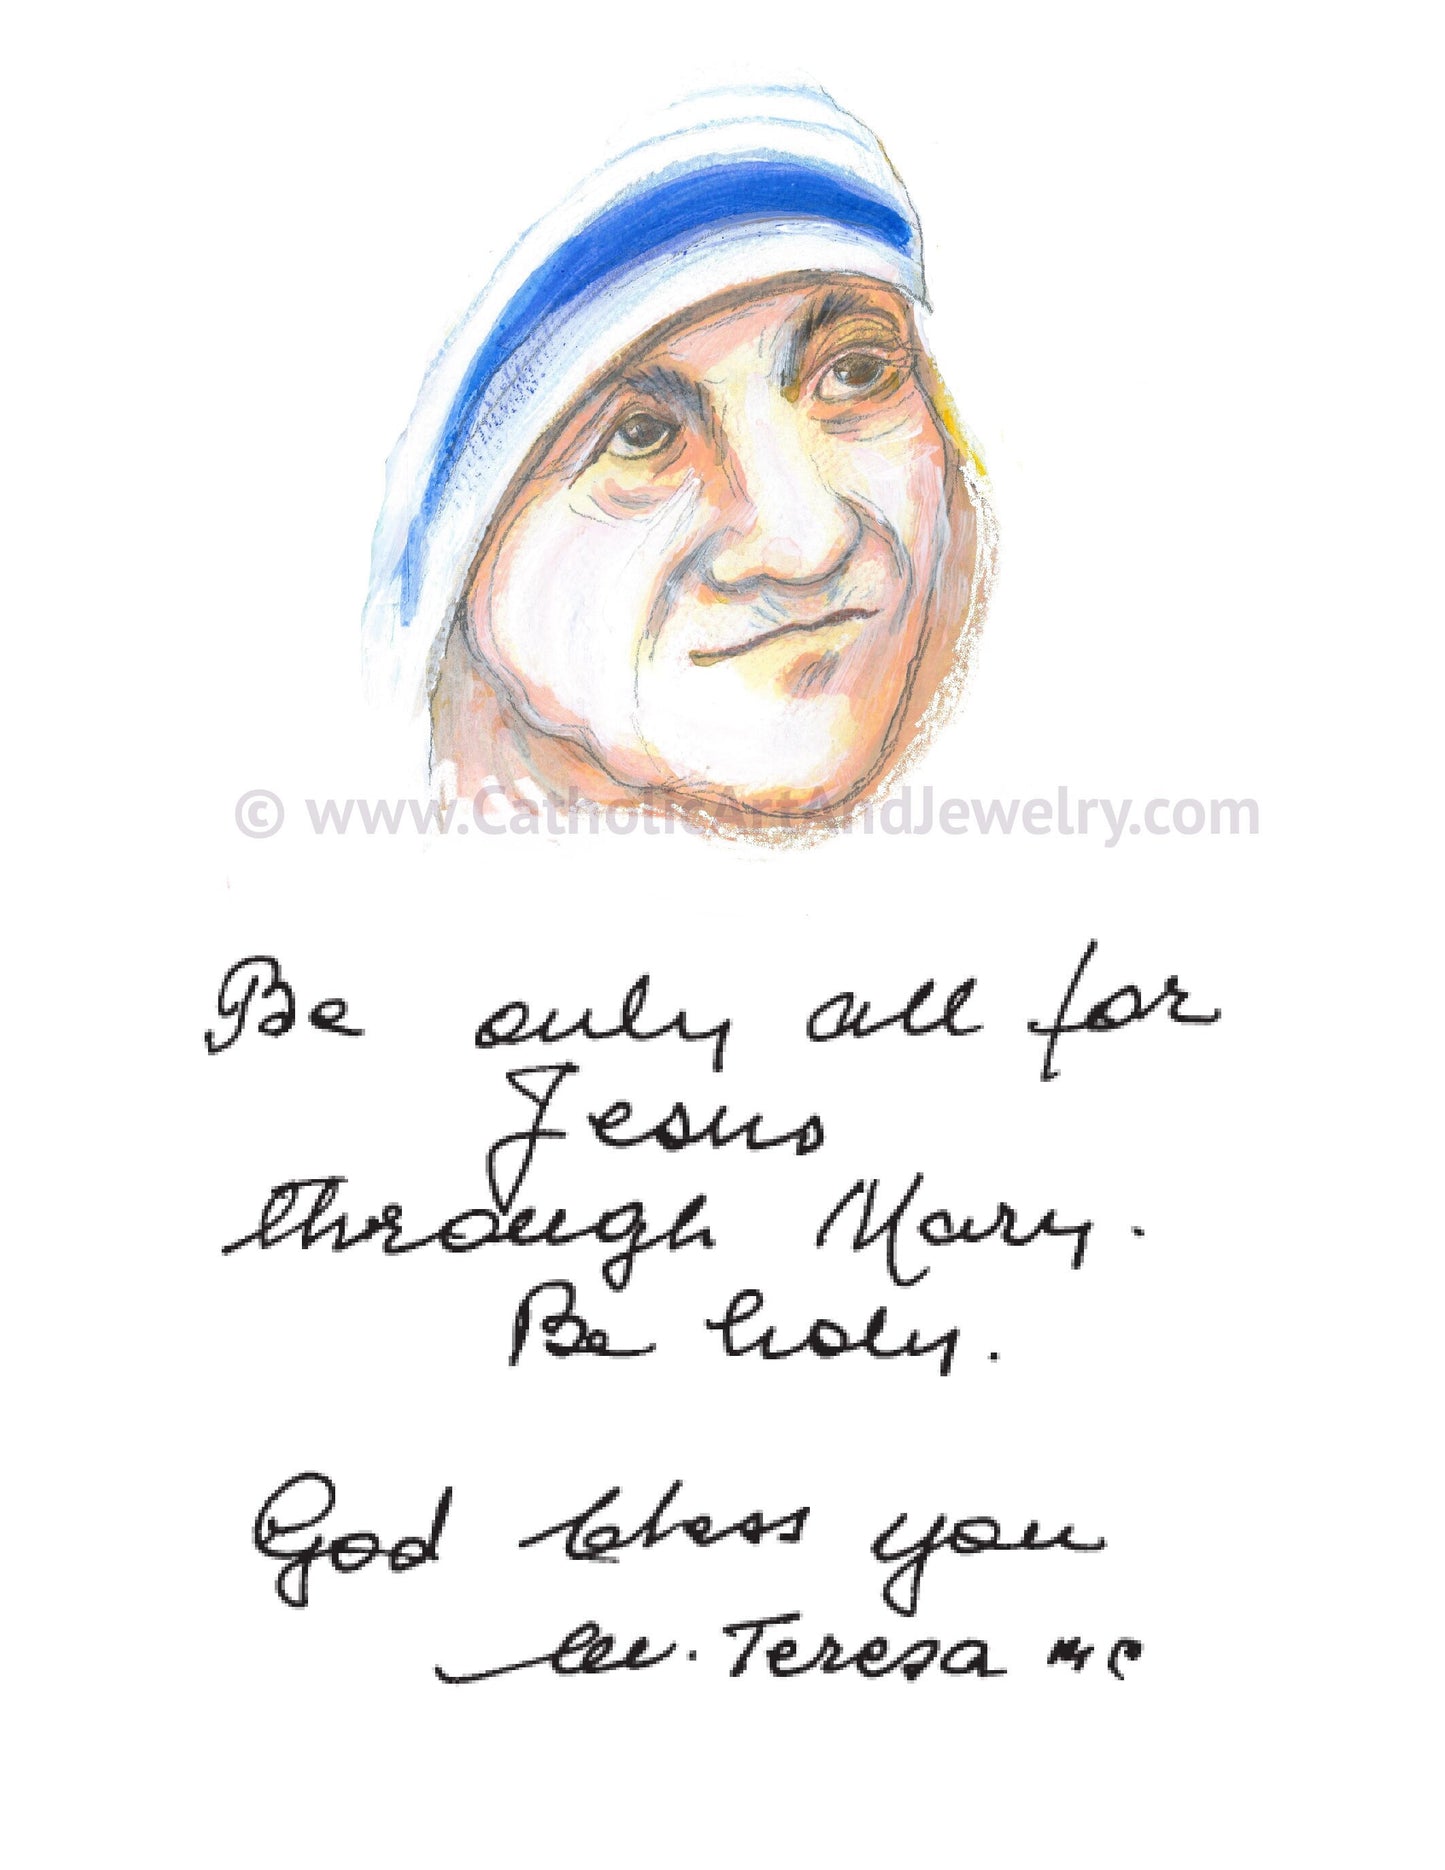 St Teresa–HER HANDWRITING – 8.5x11 – "Be only all for Jesus through Mary. Be Holy..." – Catholic Inspiration – Authentic Quote